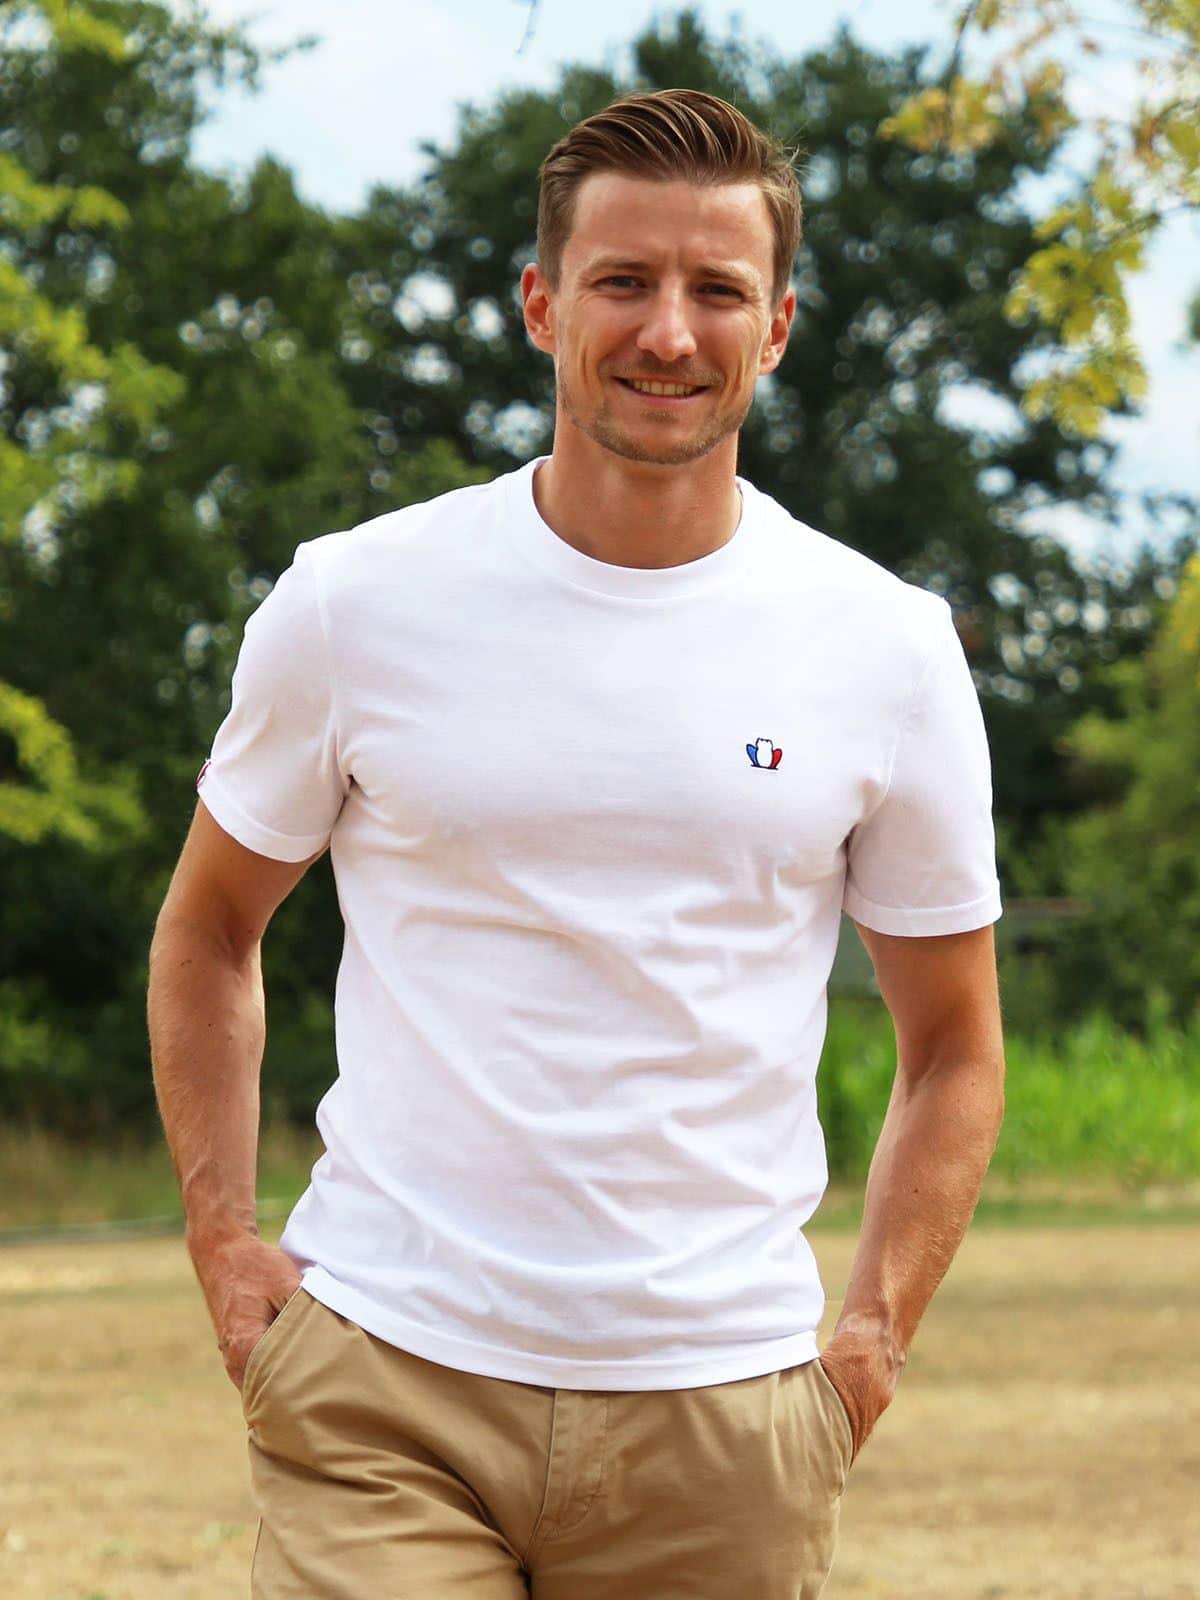 T Shirt Homme Blanc - Made in France